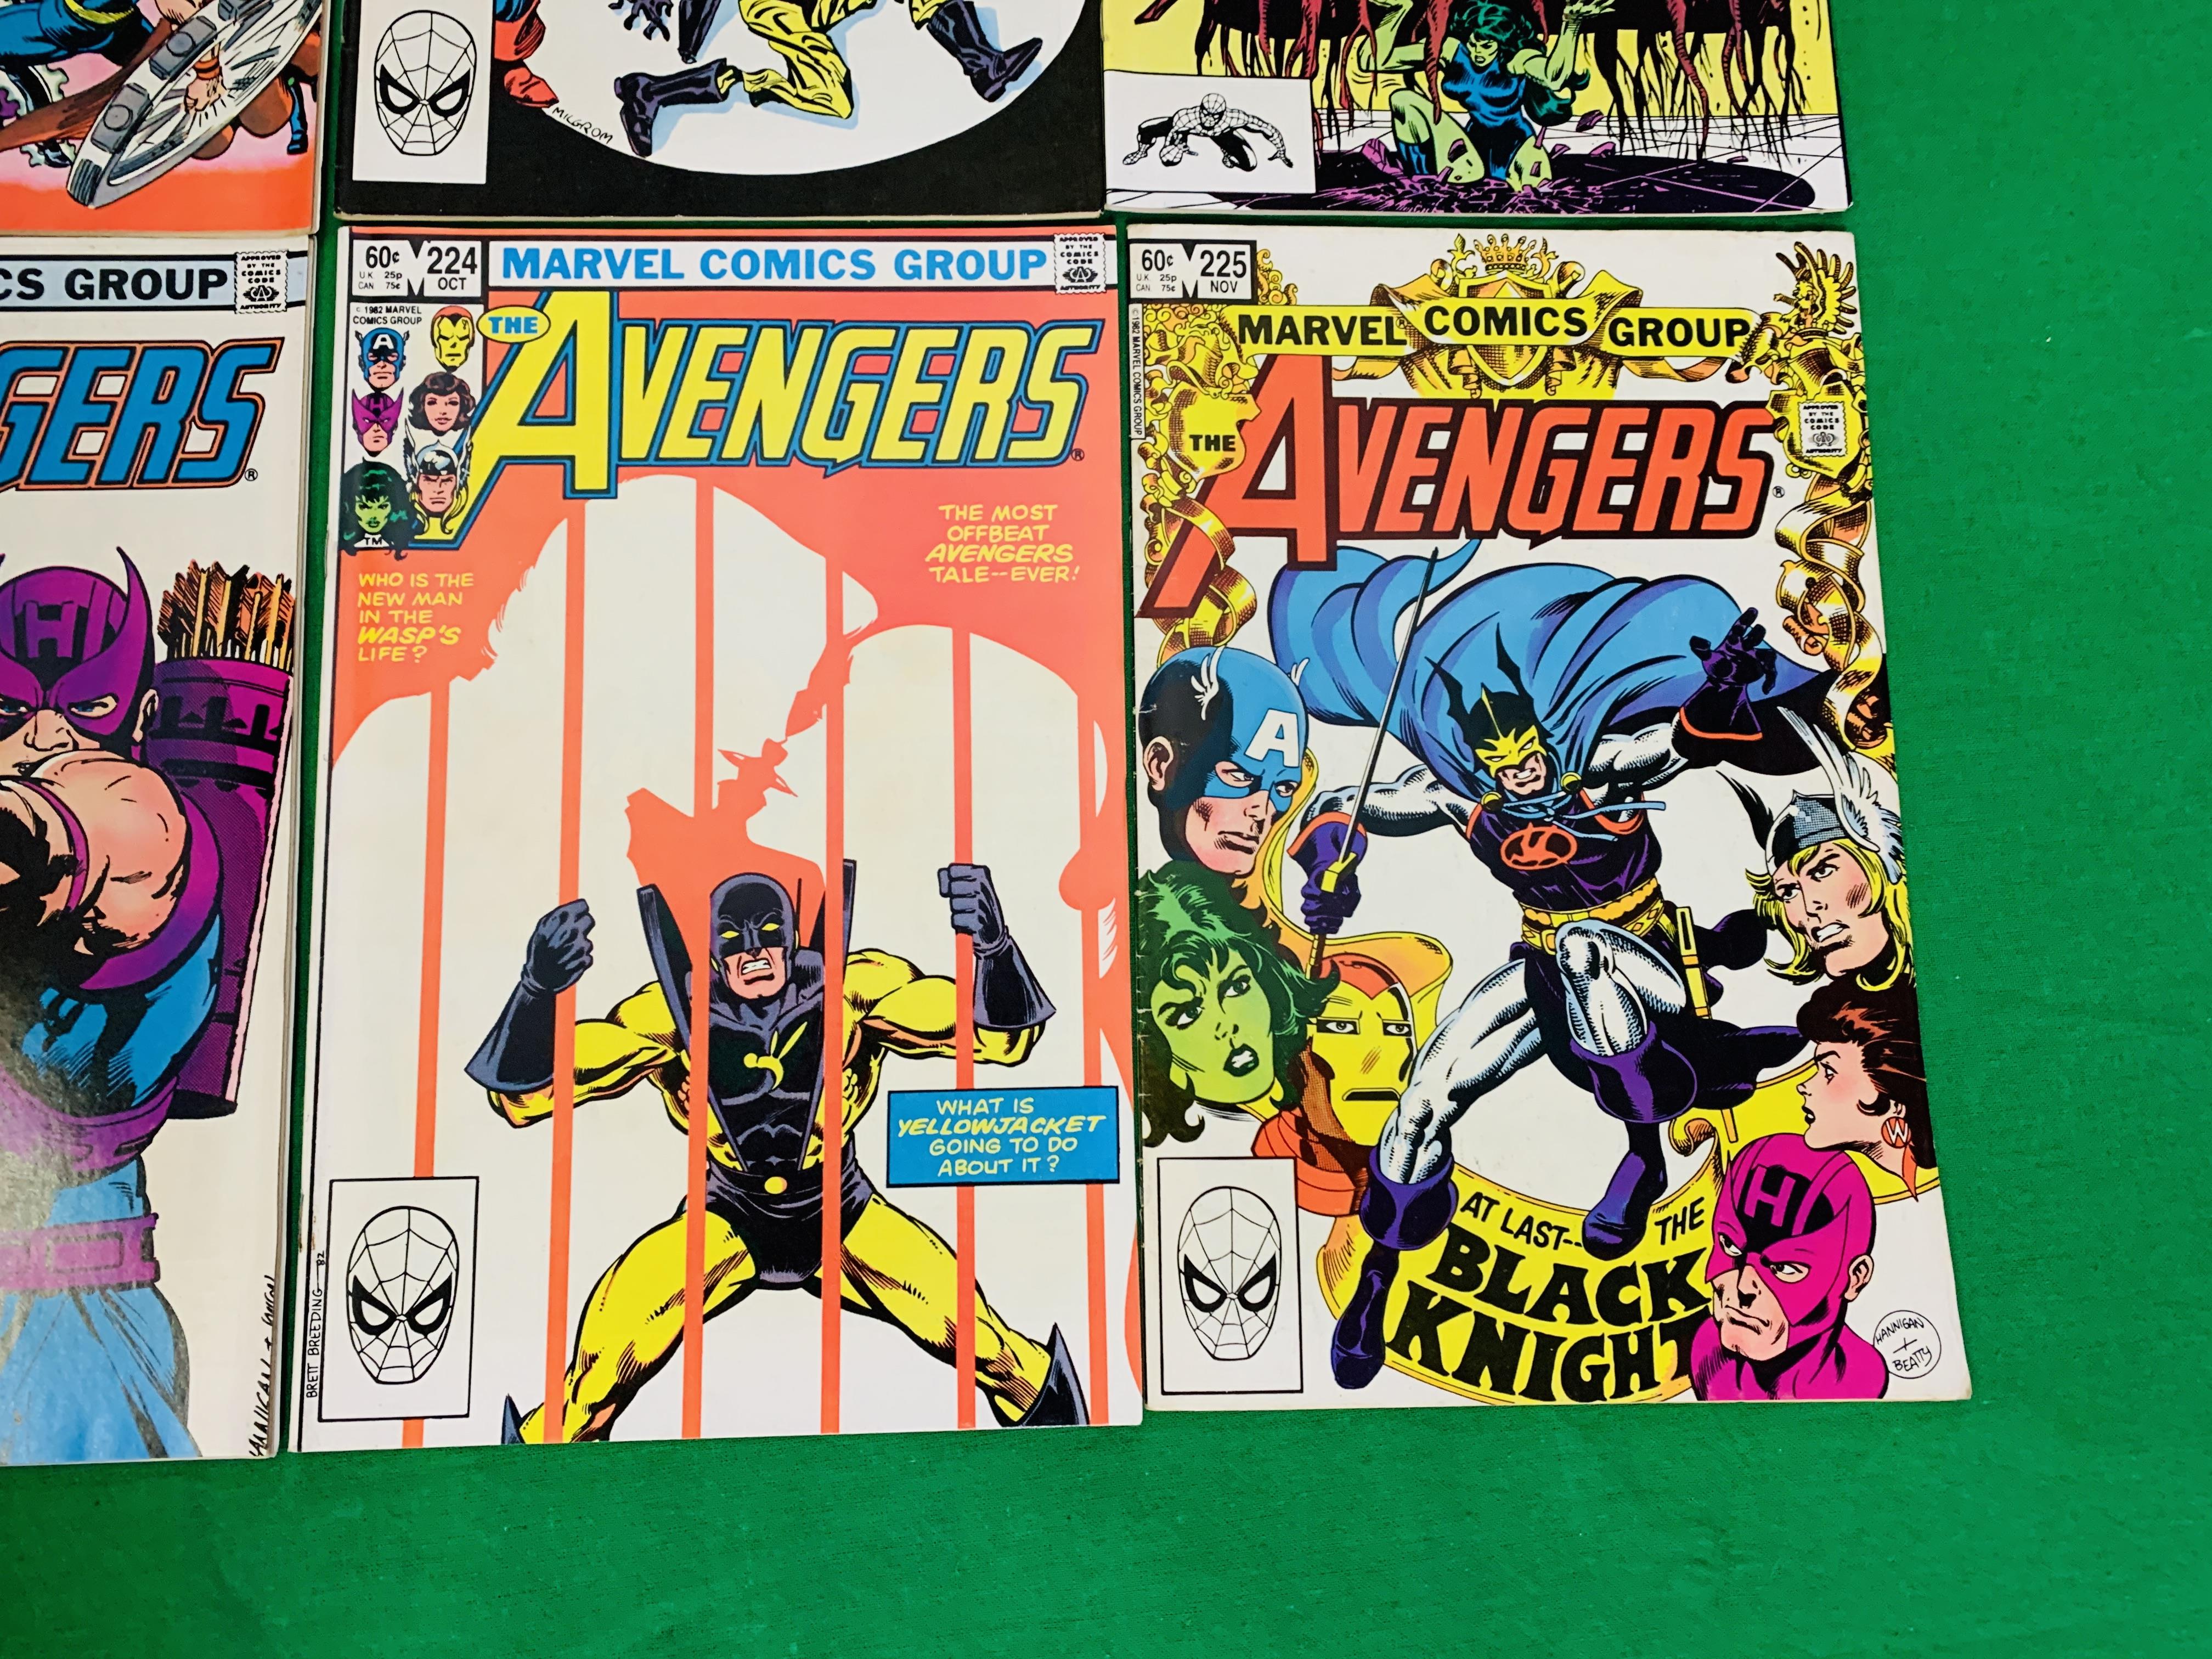 MARVEL COMICS THE AVENGERS NO. 101 - 299, MISSING ISSUES 103 AND 110. - Image 89 of 130